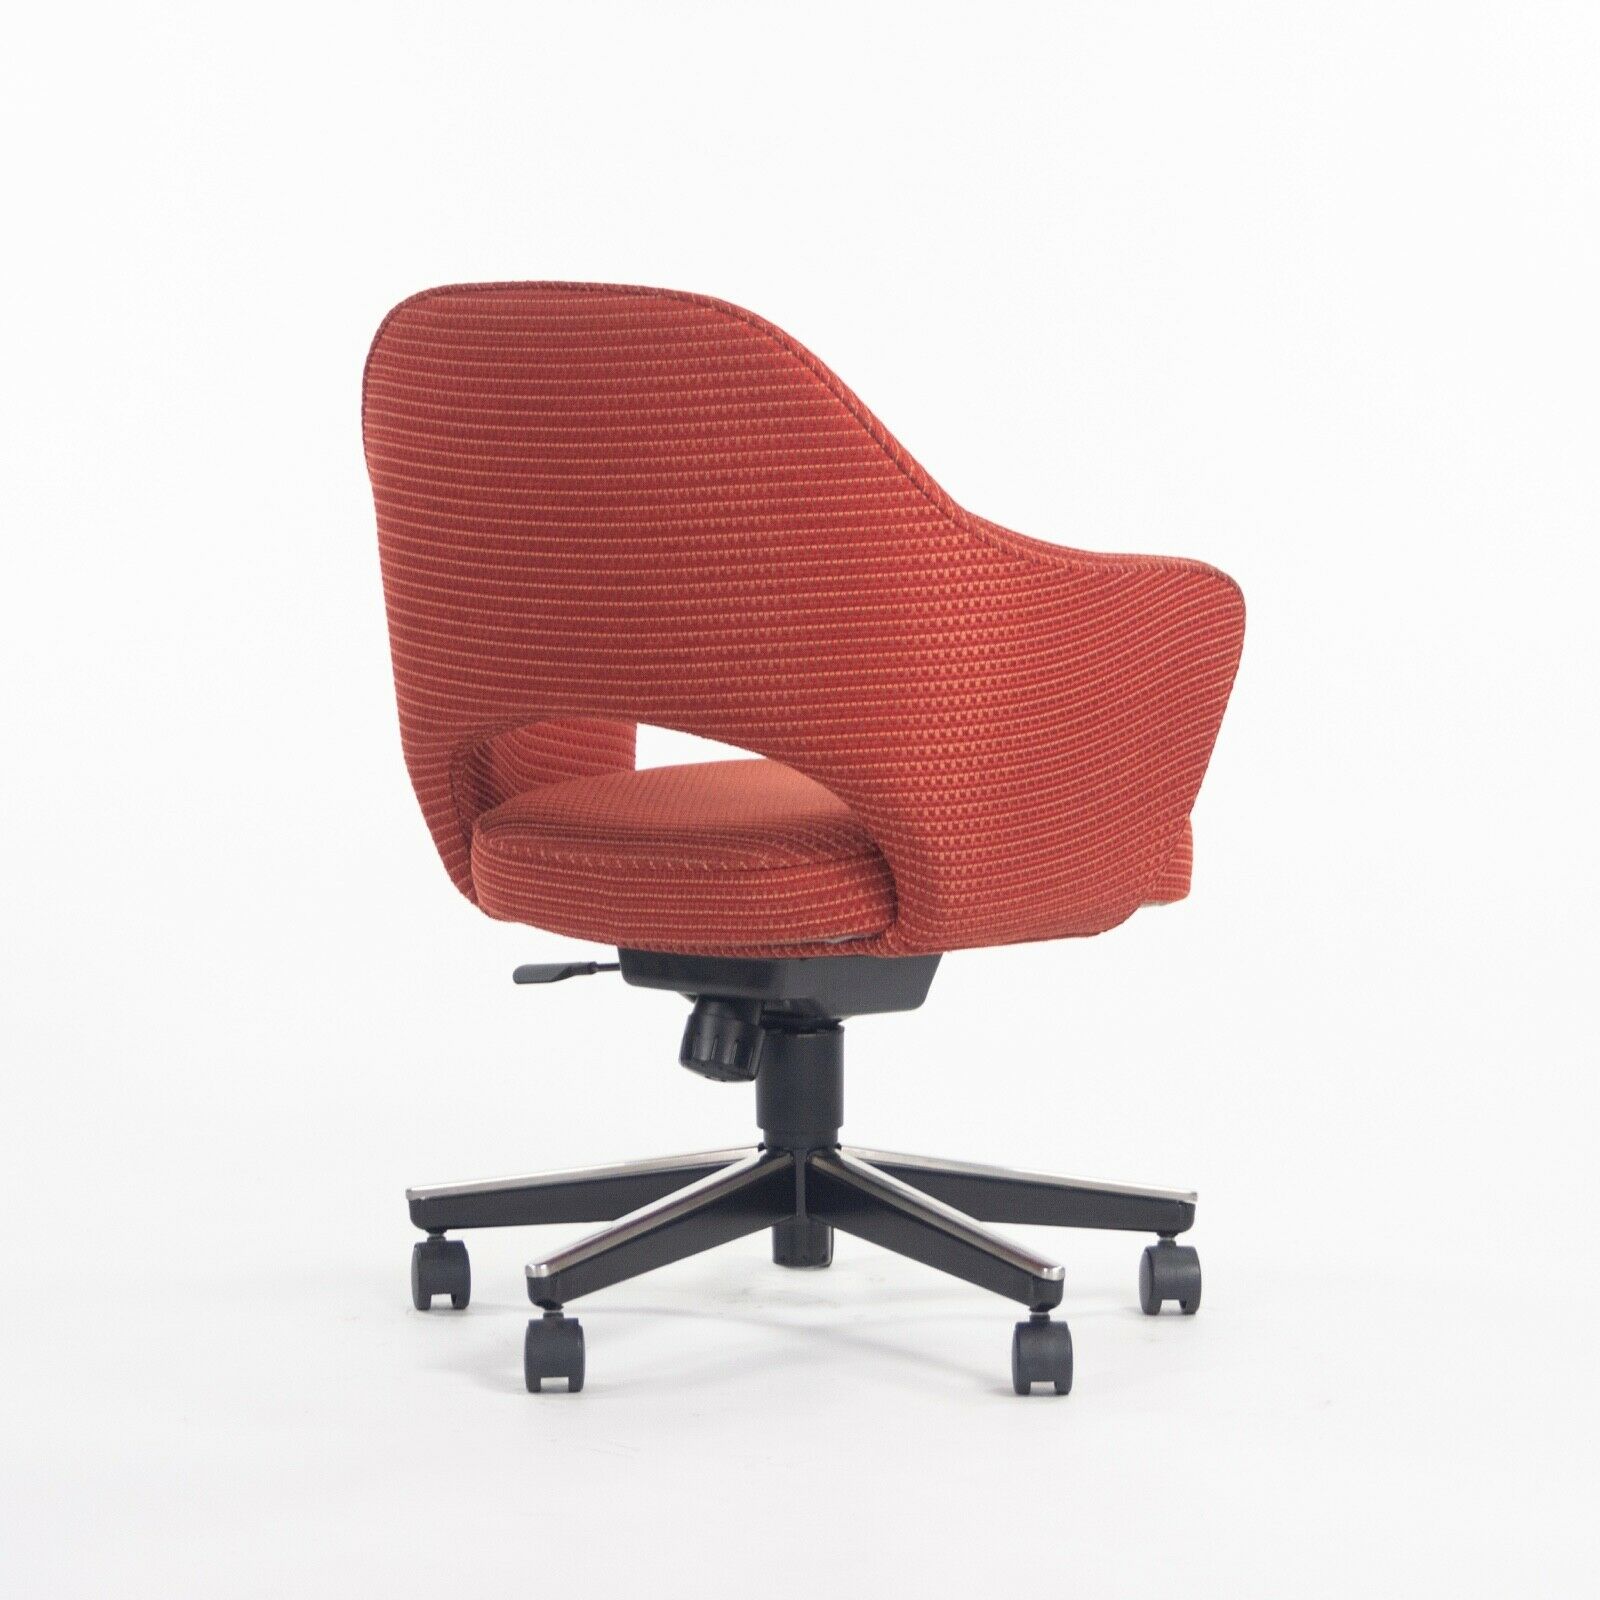 SOLD 2007 Eero Saarinen for Knoll Executive Arm Office Desk Chair Red Fabric 4 Available